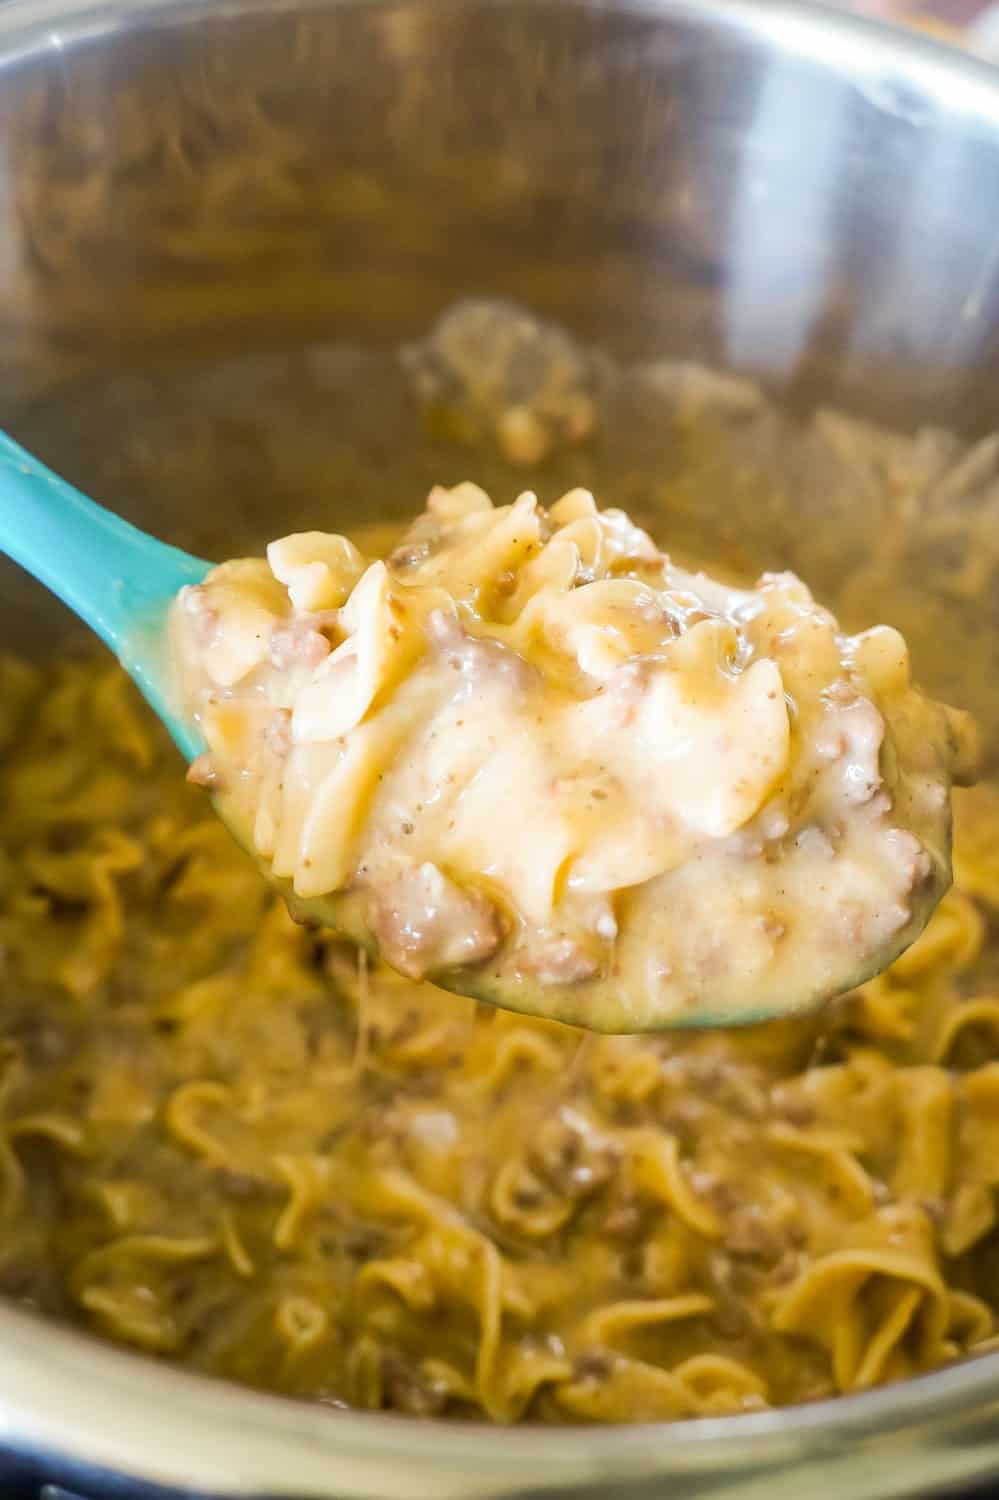 Instant Pot Cheesy Ground Beef and Noodles is an easy pressure cooker dinner recipe using hamburger meat and egg noodles loaded with mozzarella and cheddar cheese.